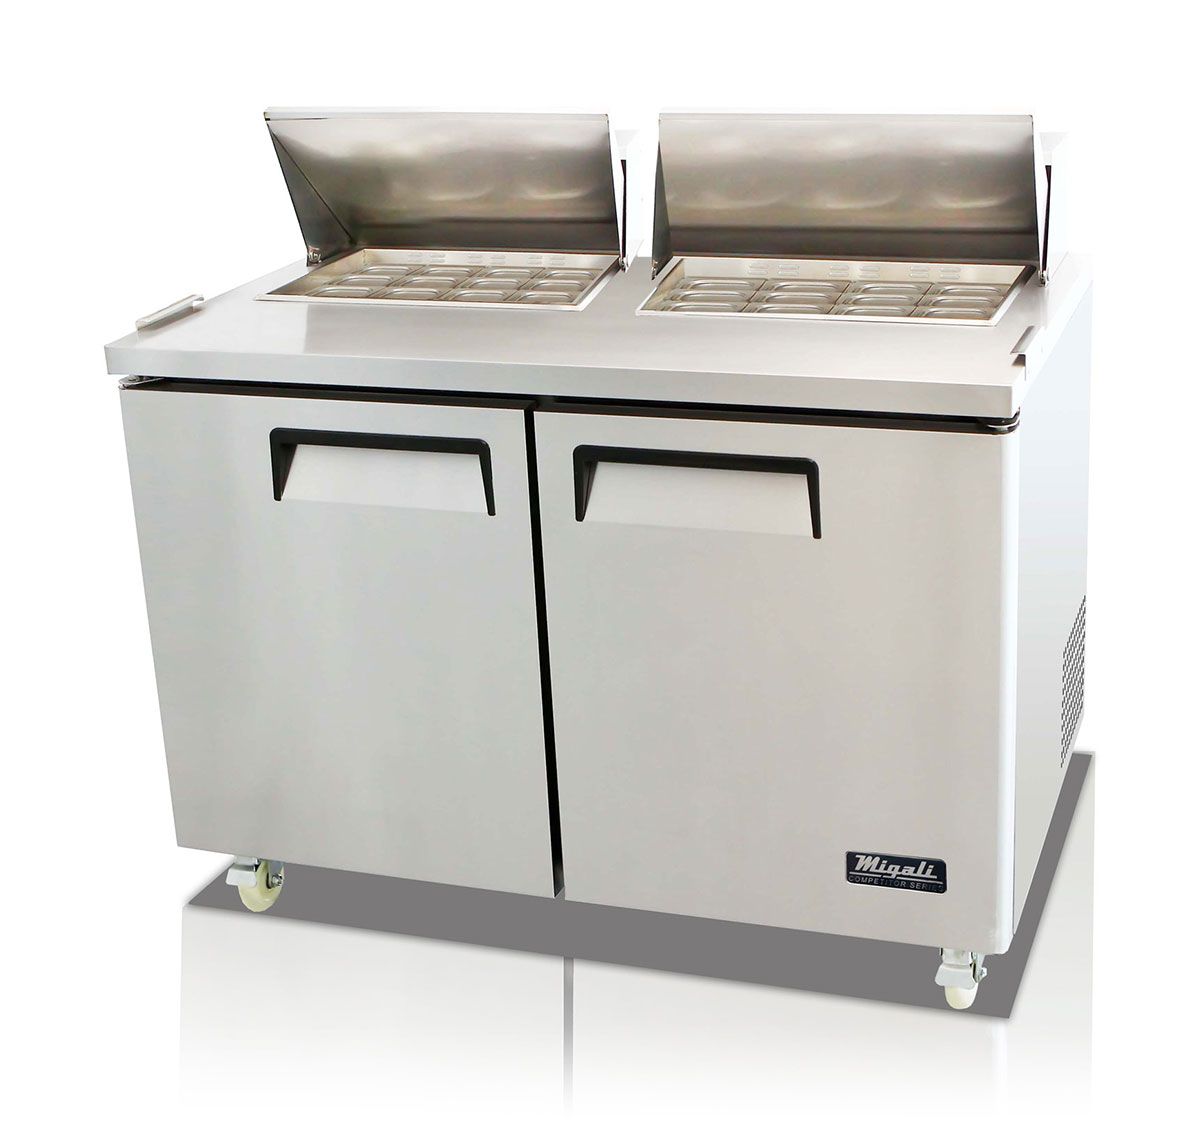 C-sp60-24bt-hc 60.2 In. Competitor Series Refrigerated Counter & Big Top Sandwich Preparation Table, Stainless Steel & Galvanized Steel